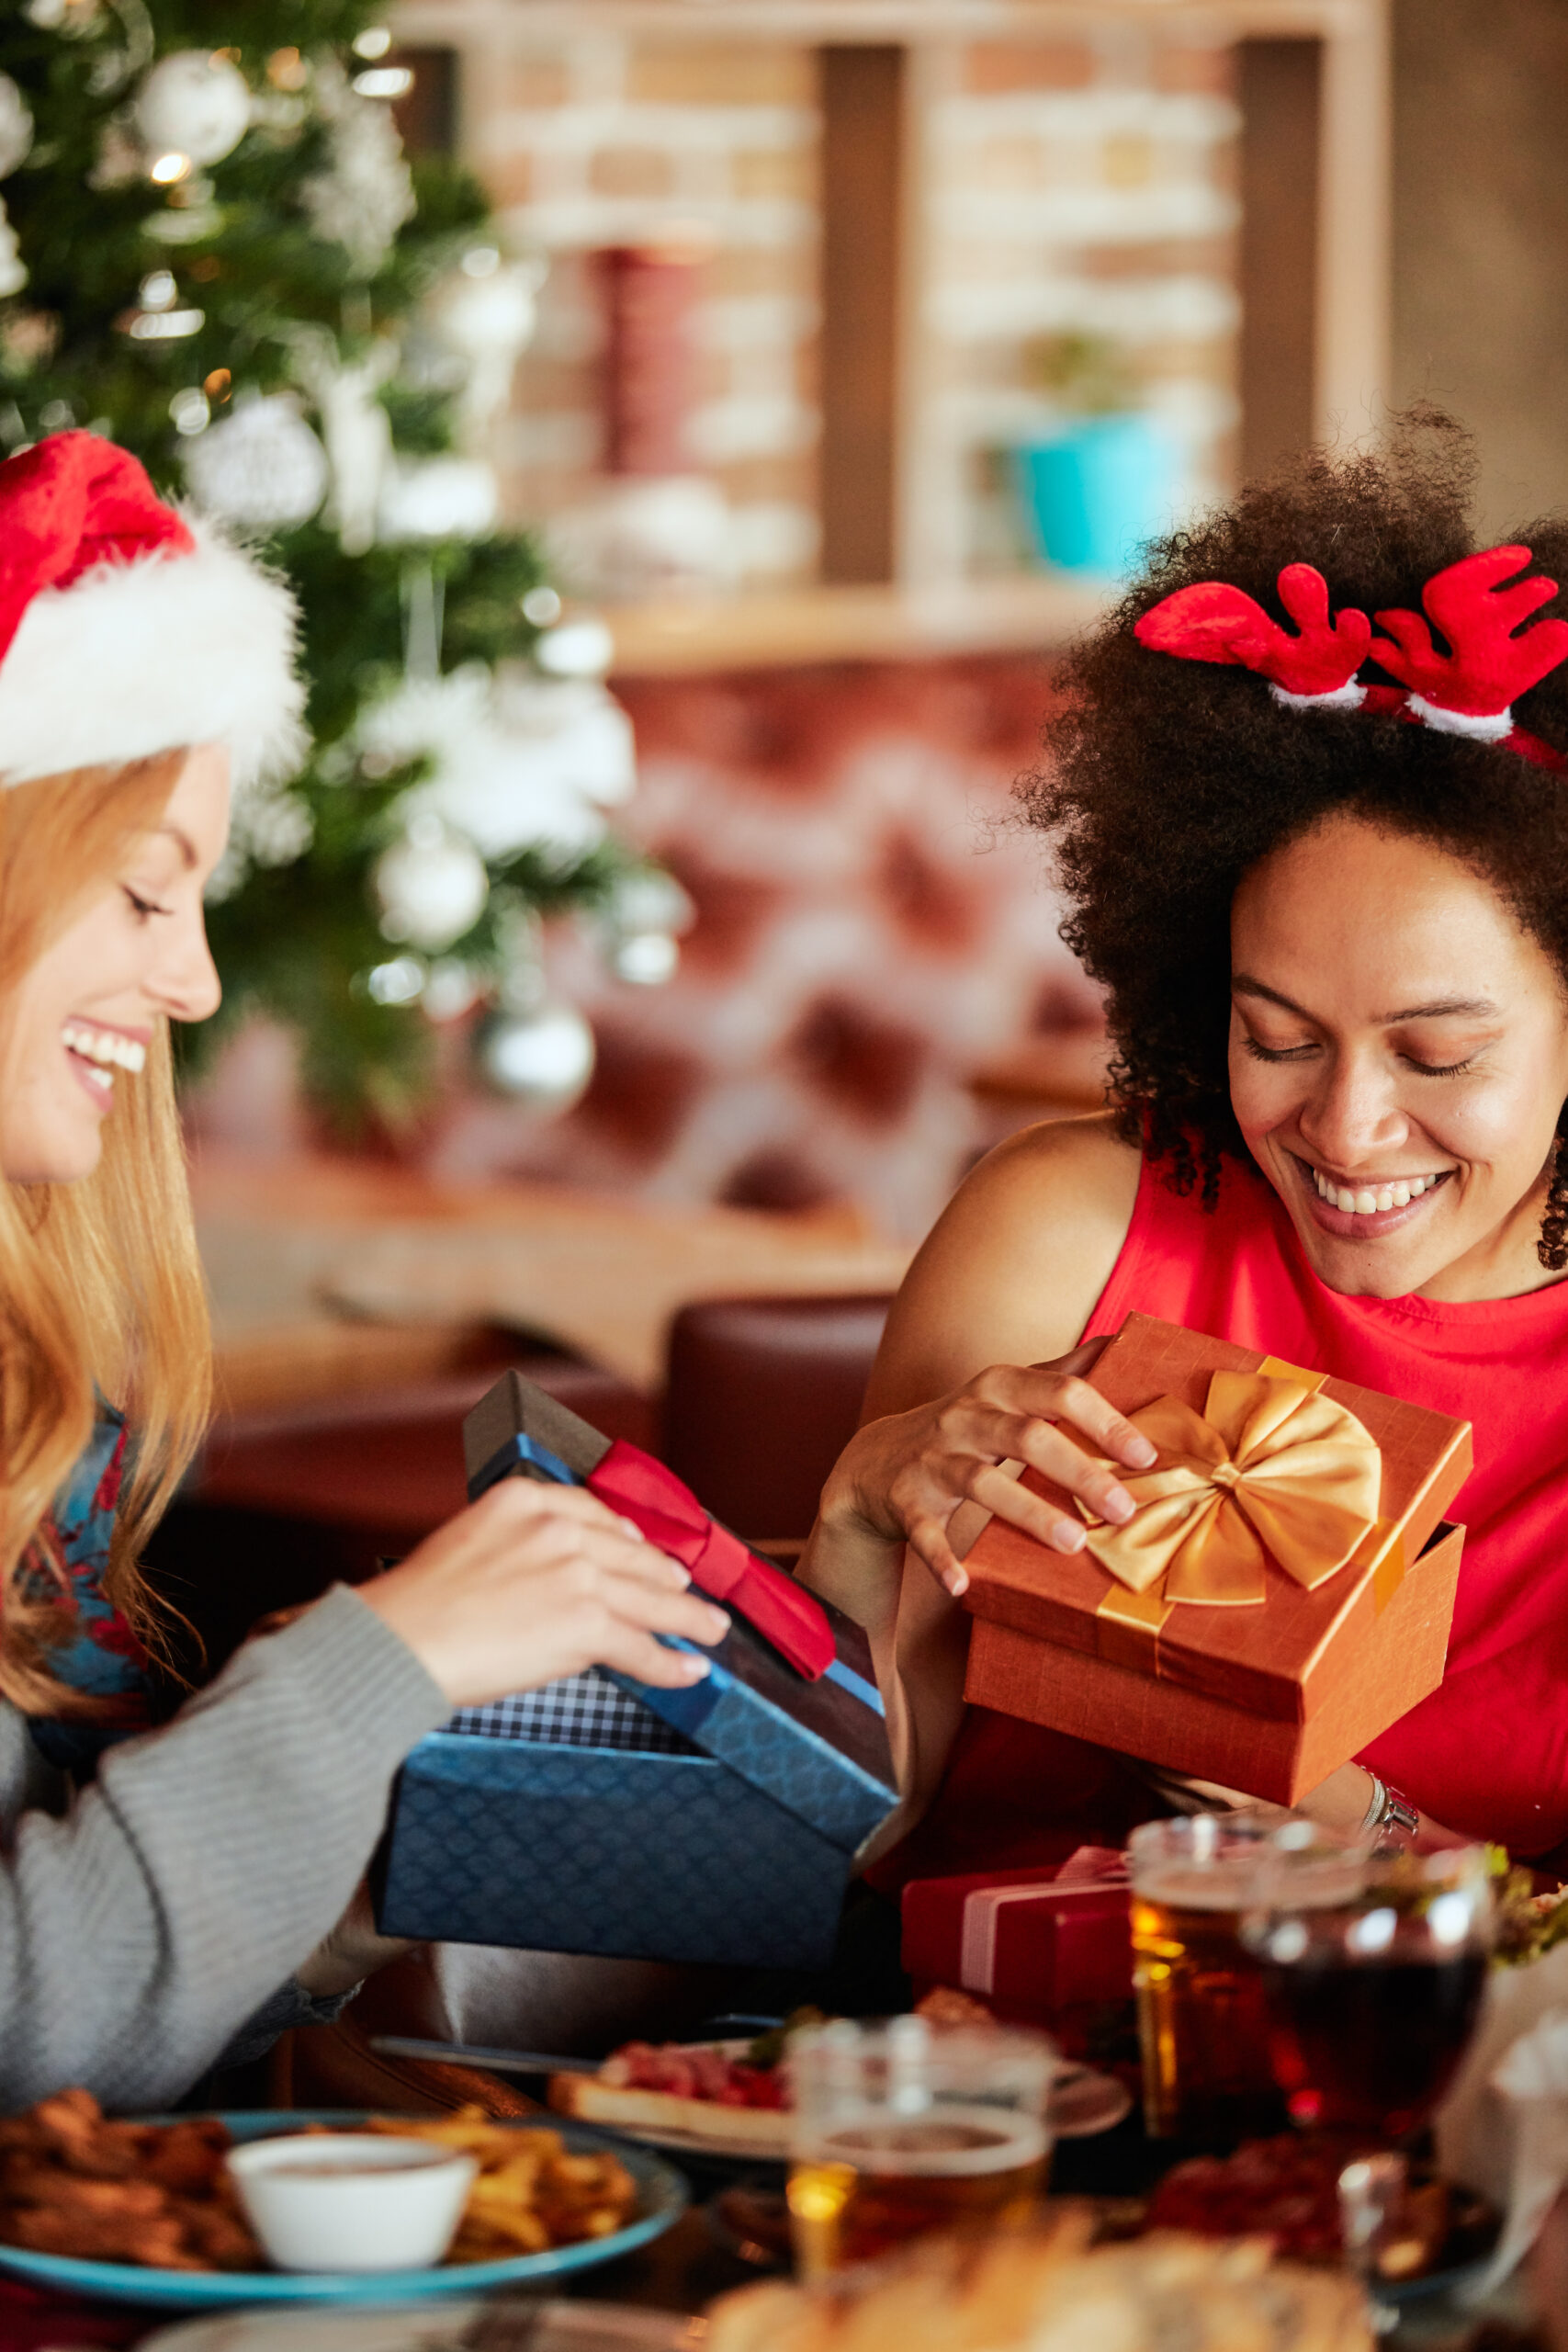 Friends giving gifts to each other while sitting at table. In background Christmas tree. Christmas holidays concept.